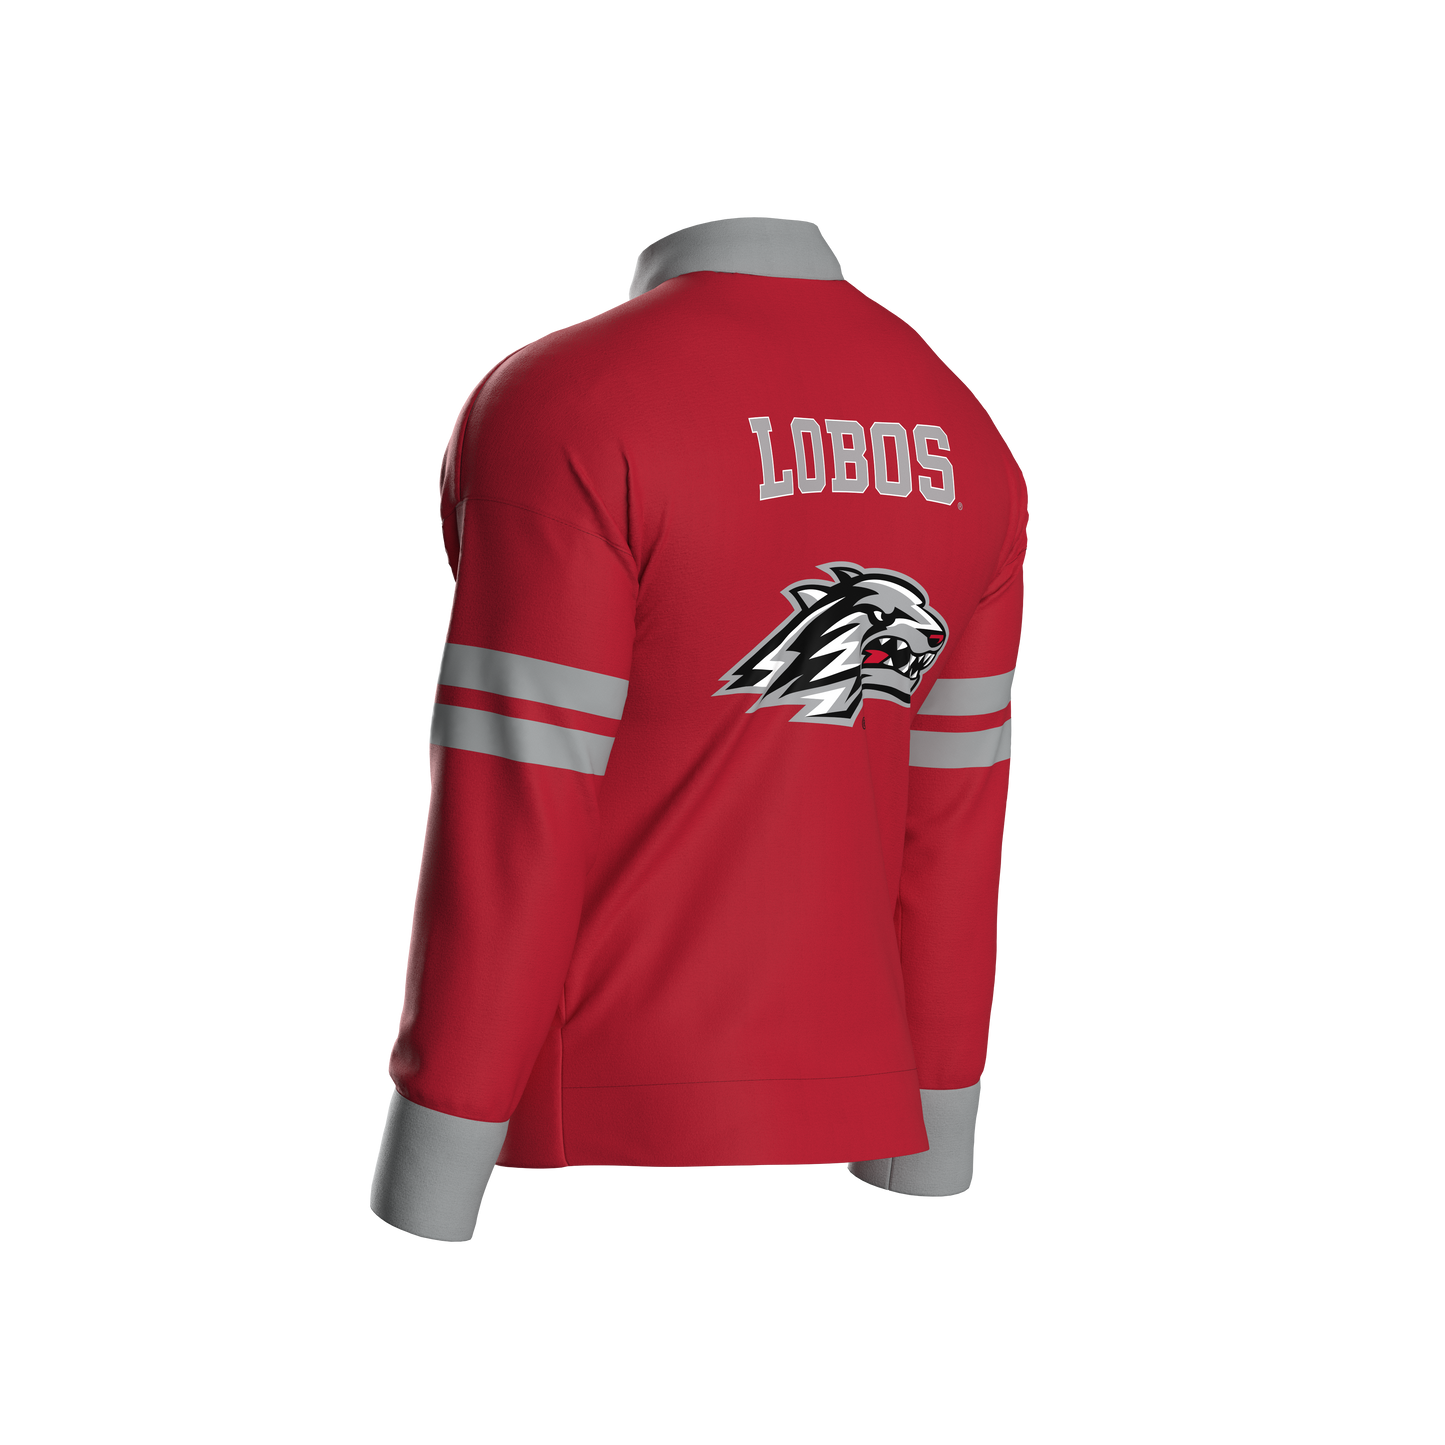 University of New Mexico Home Zip-Up (youth)